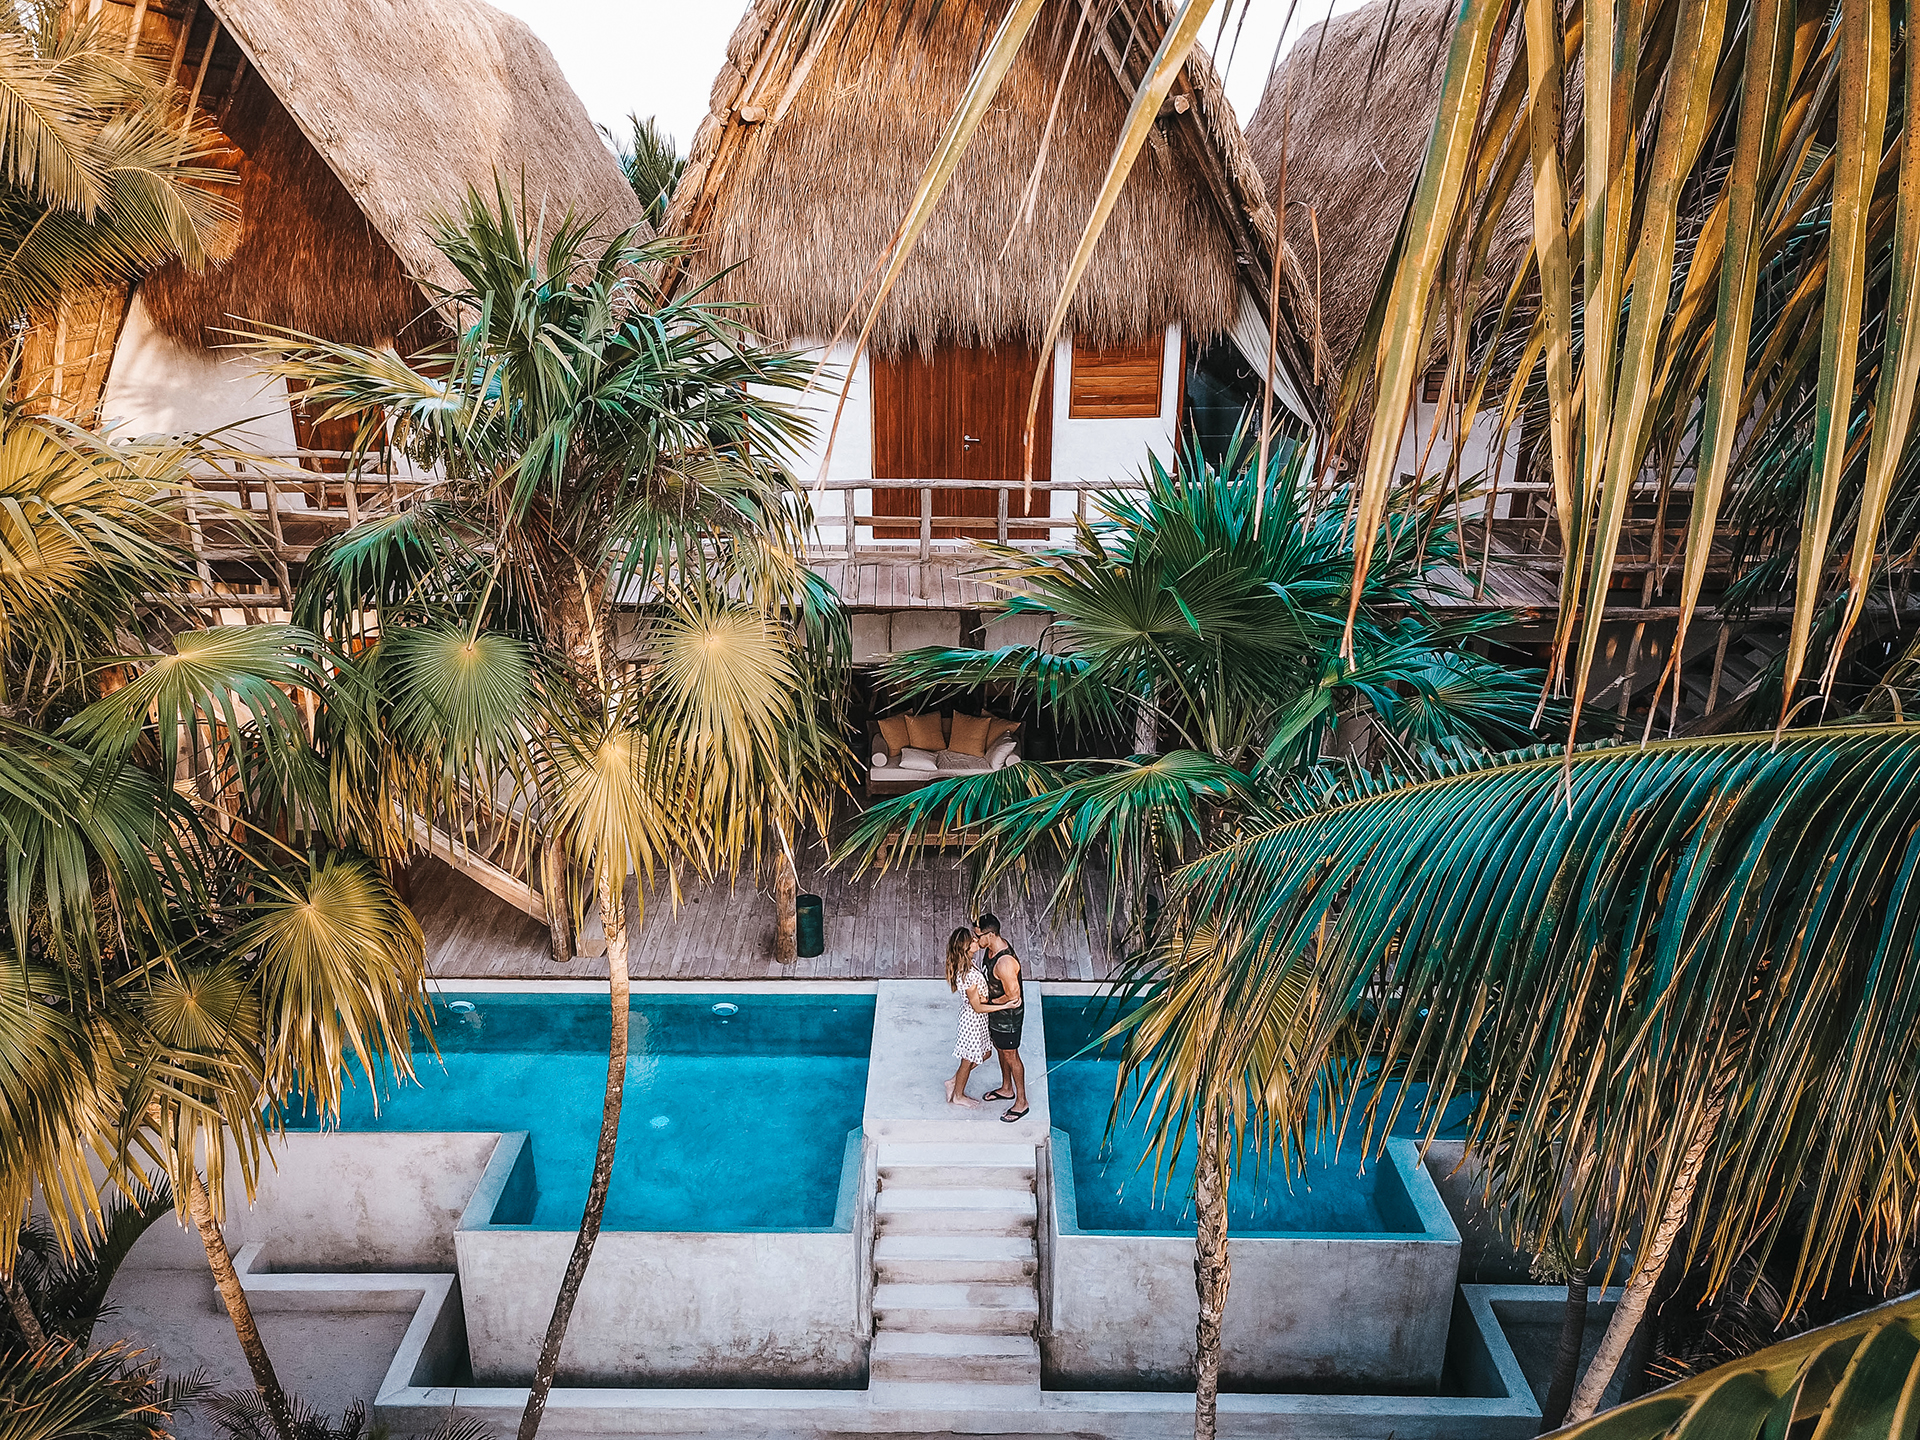 a couple enjoys a tropical vacation. With destinations becoming more open to travelers again, you might be dreaming of romantic getaways and experiences to share with your lover.